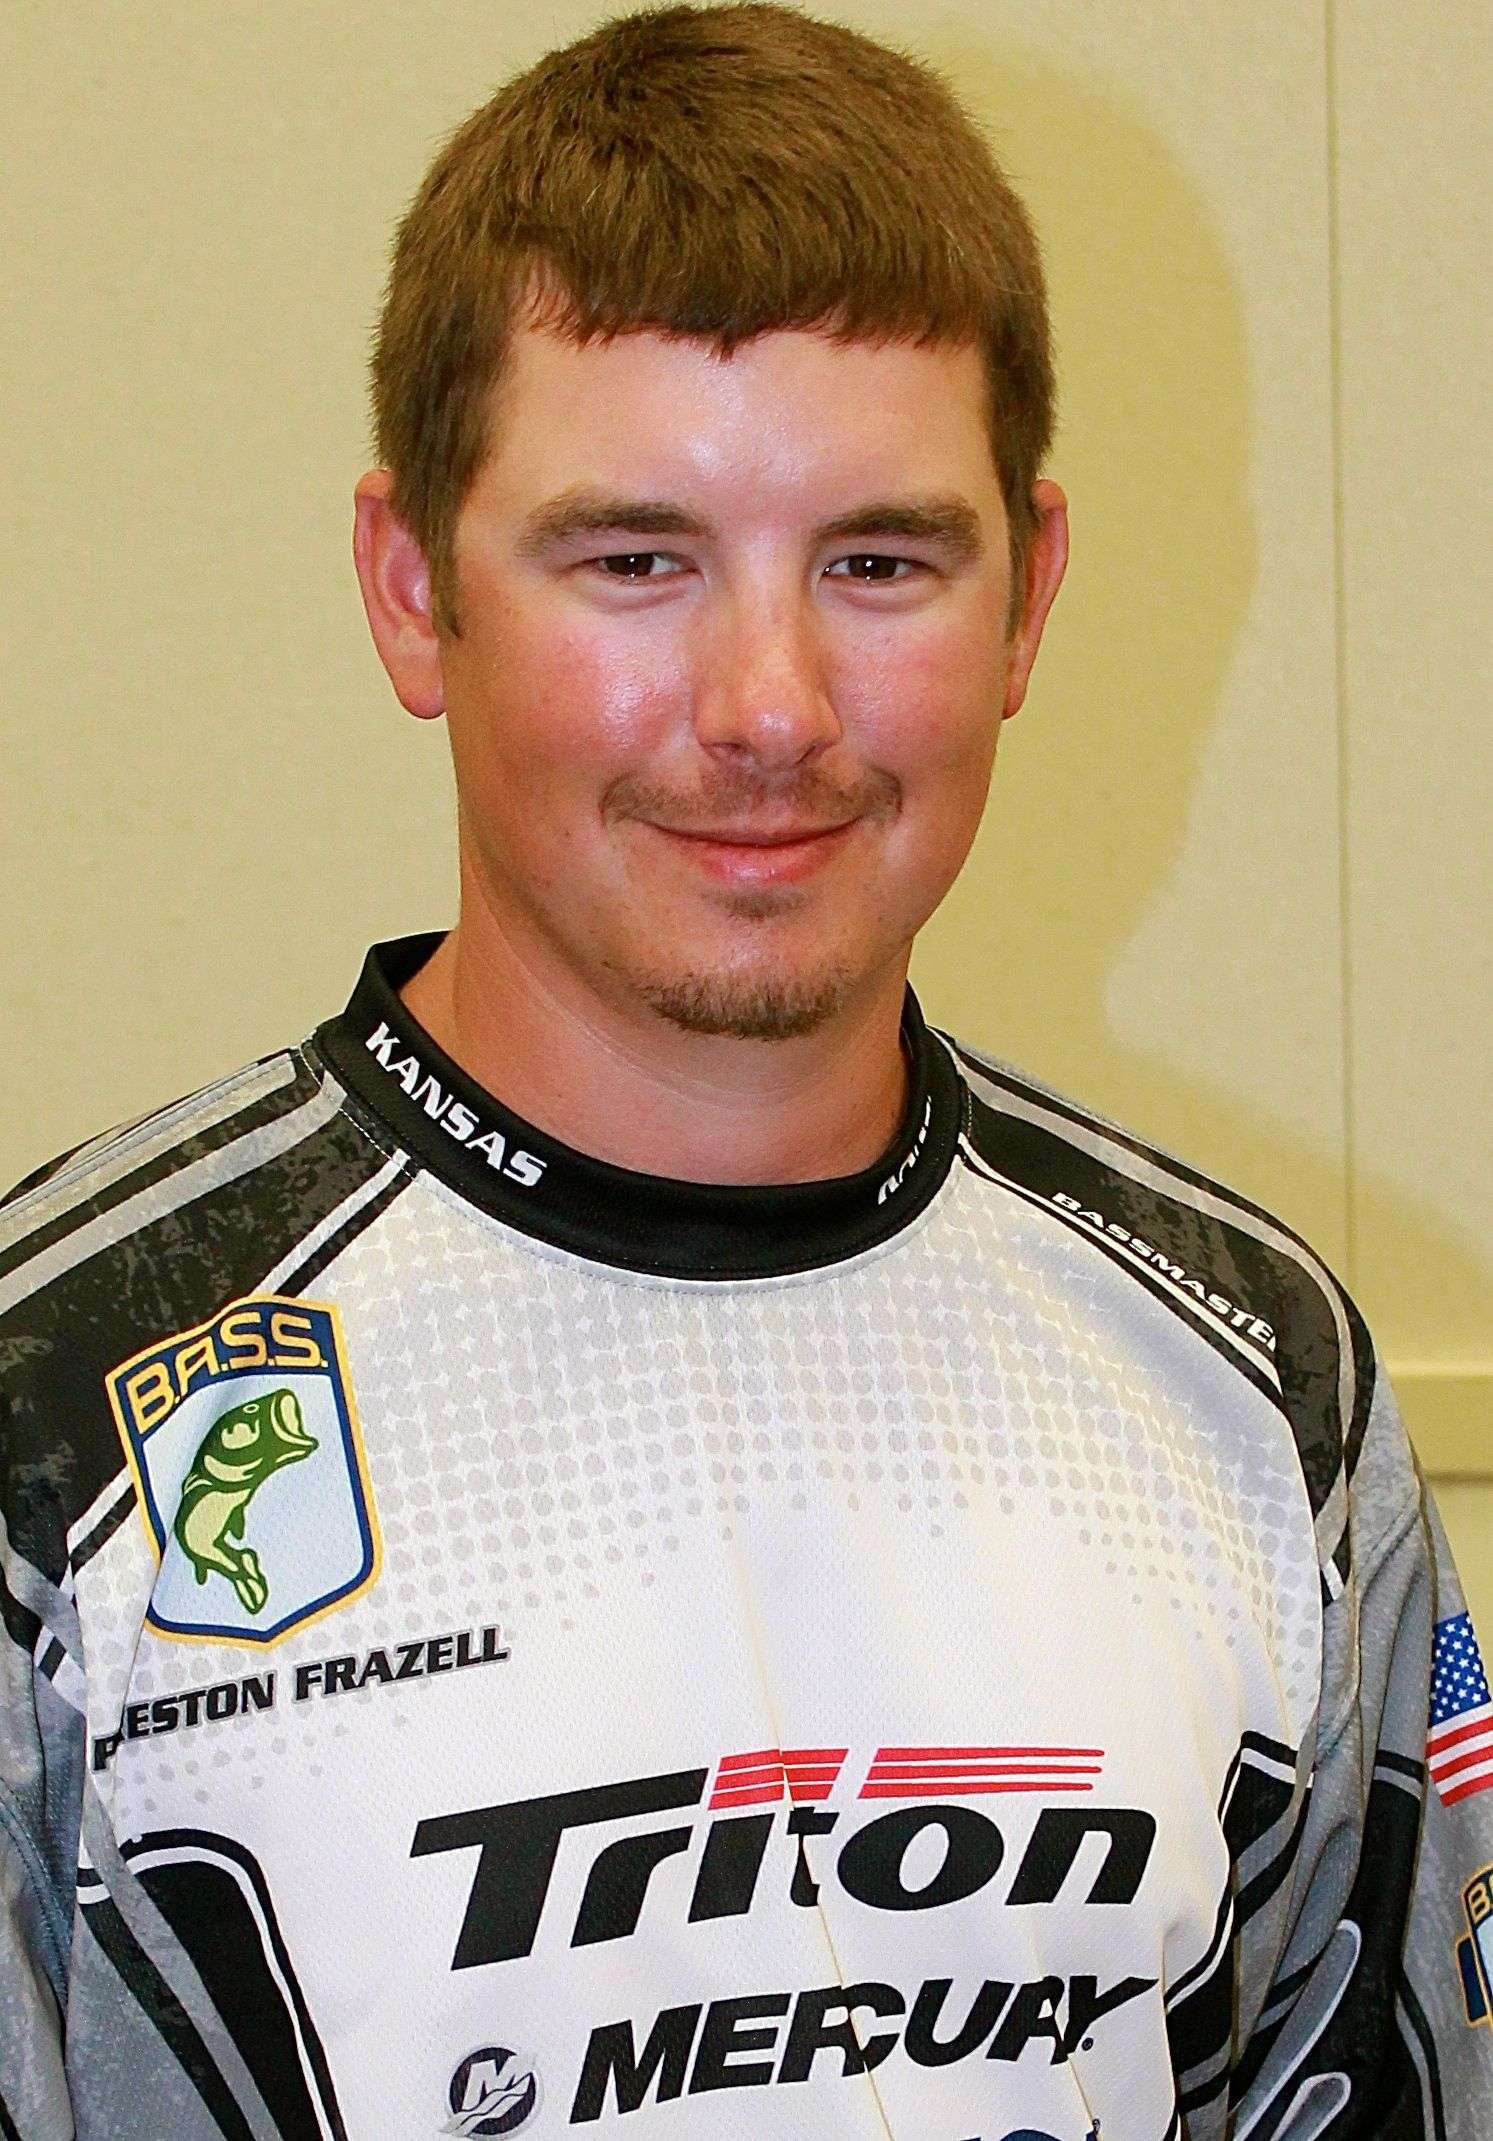 In 12th place with 9-15 is Kansas B.A.S.S. Nation angler Preston Frazell. Back home in Cleveland, Okla., he works in industrial sales.